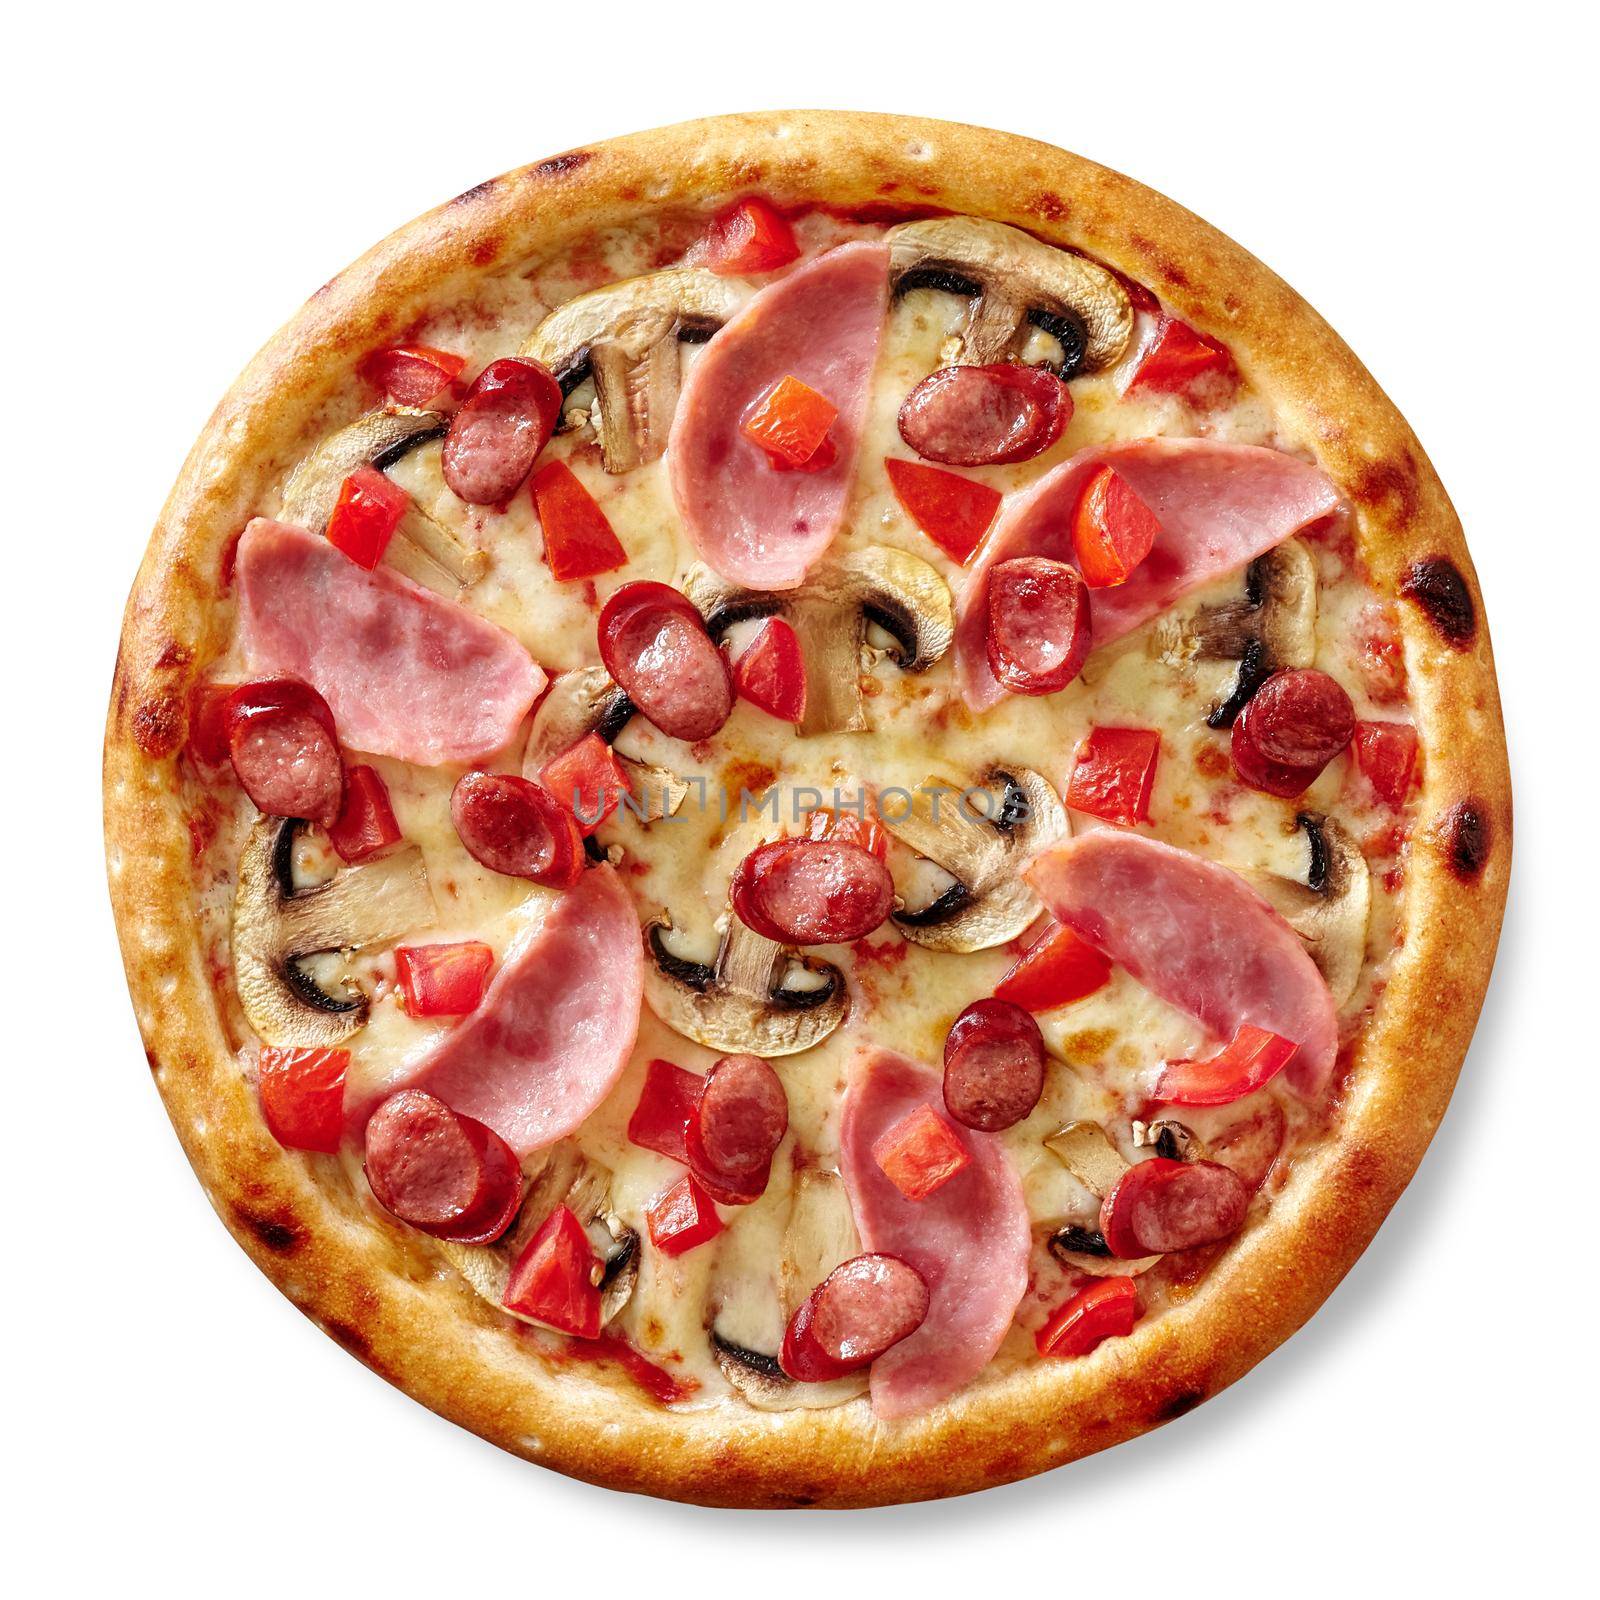 Whole freshly baked delicious pizza with melted mozzarella cheese and filling of ham slices, hunting sausages, mushrooms and fresh tomatoes, top view on white background